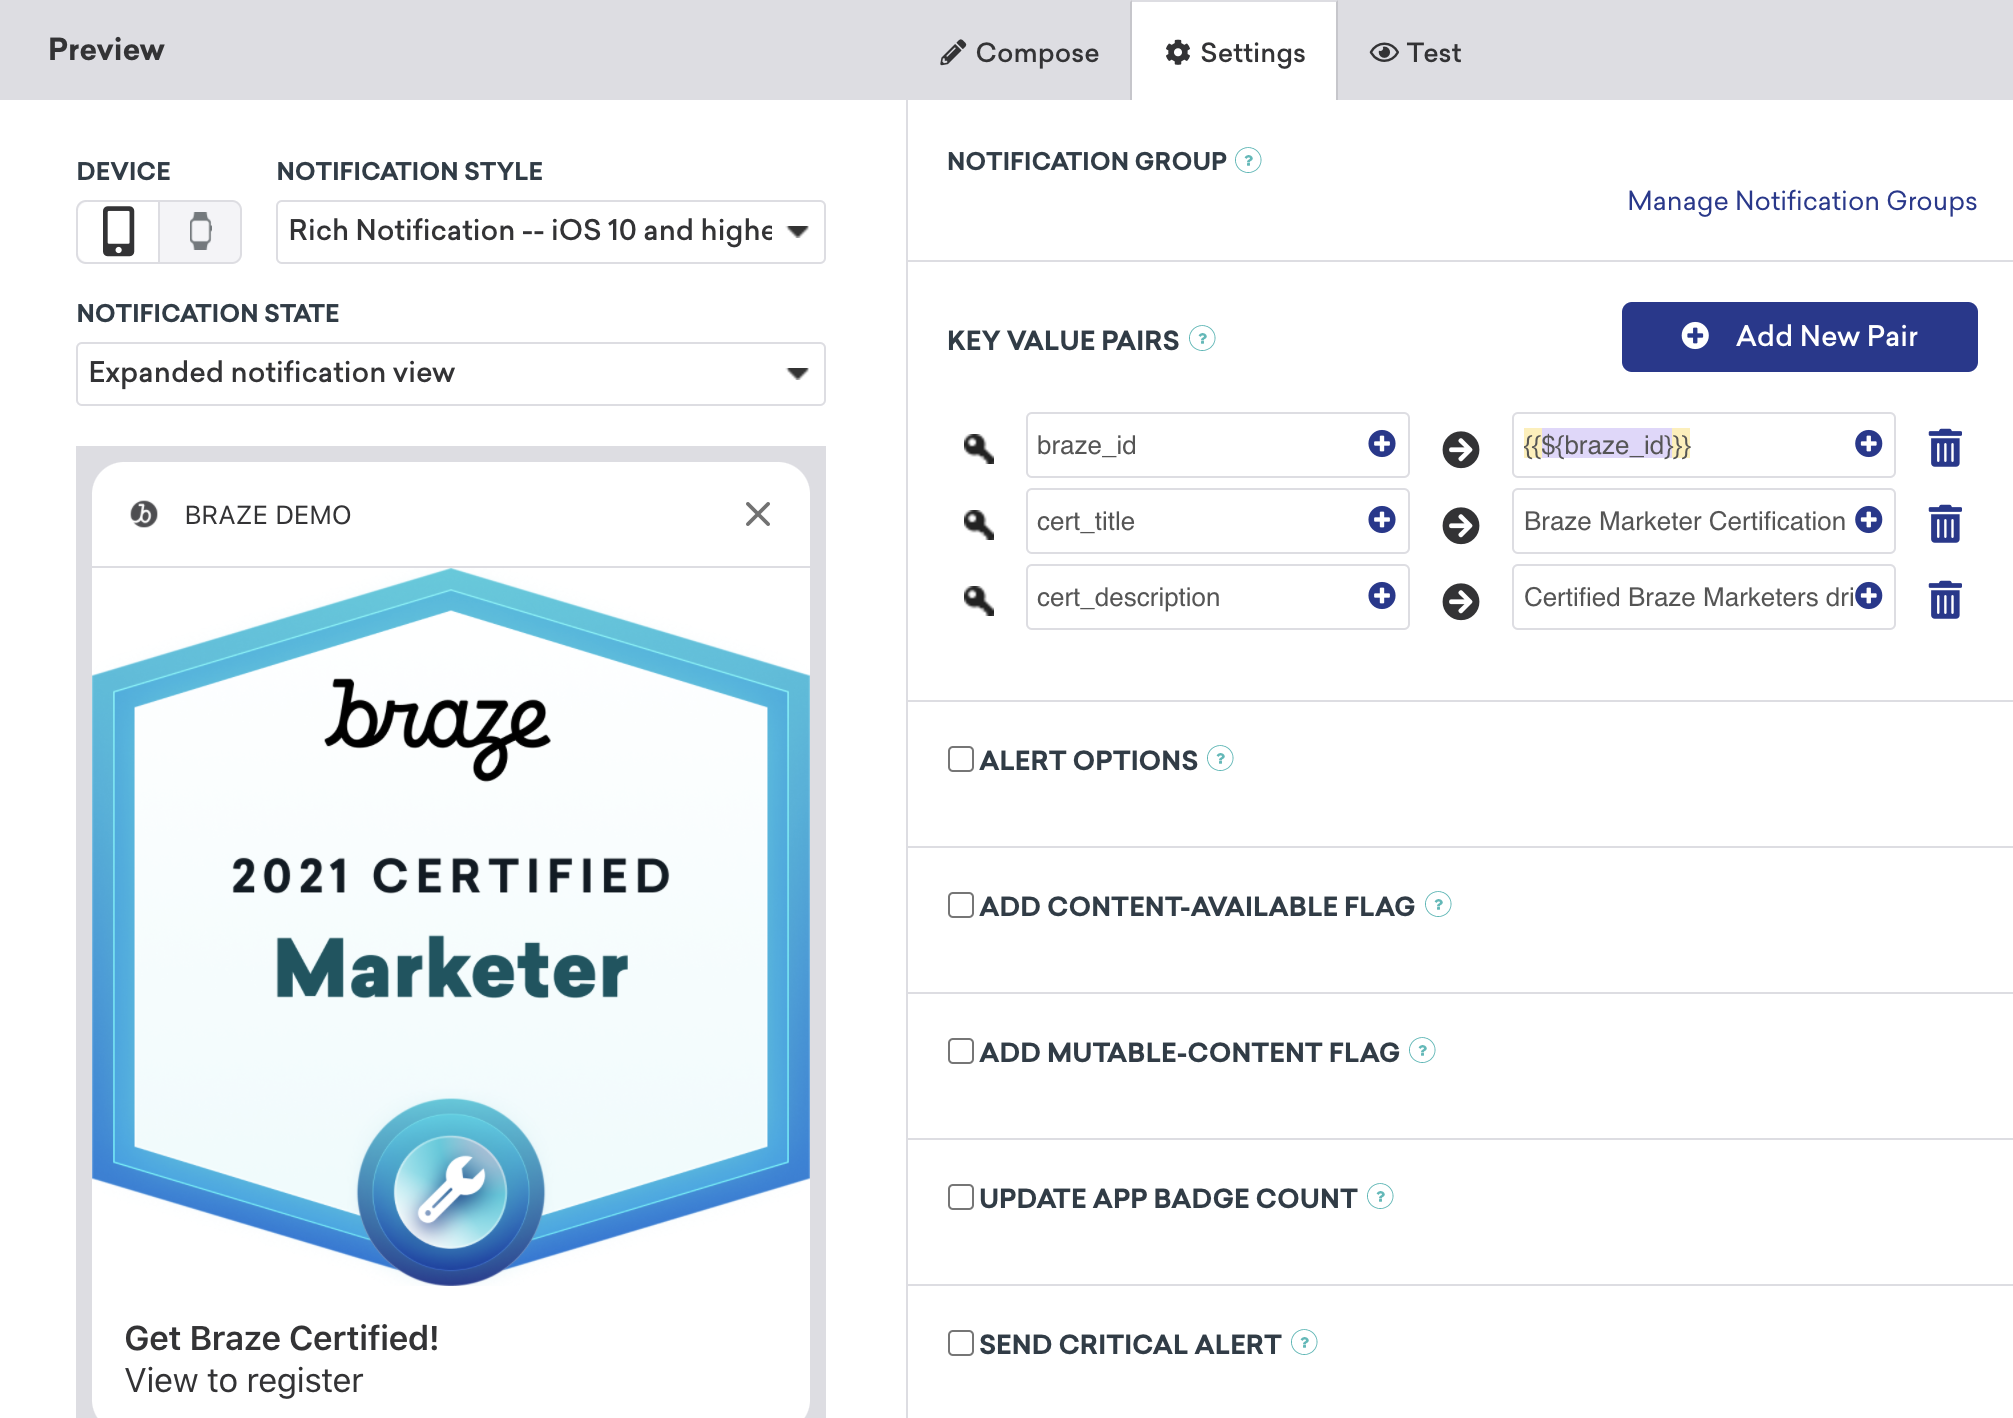 A push message with three sets of key-value pairs. 1. "Braze_id" set as a Liquid call to retrieve Braze ID. 2. "cert_title" set as "Braze Marketer Certification". 3. "Cert_description" set as "Certified Braze marketers drive...".